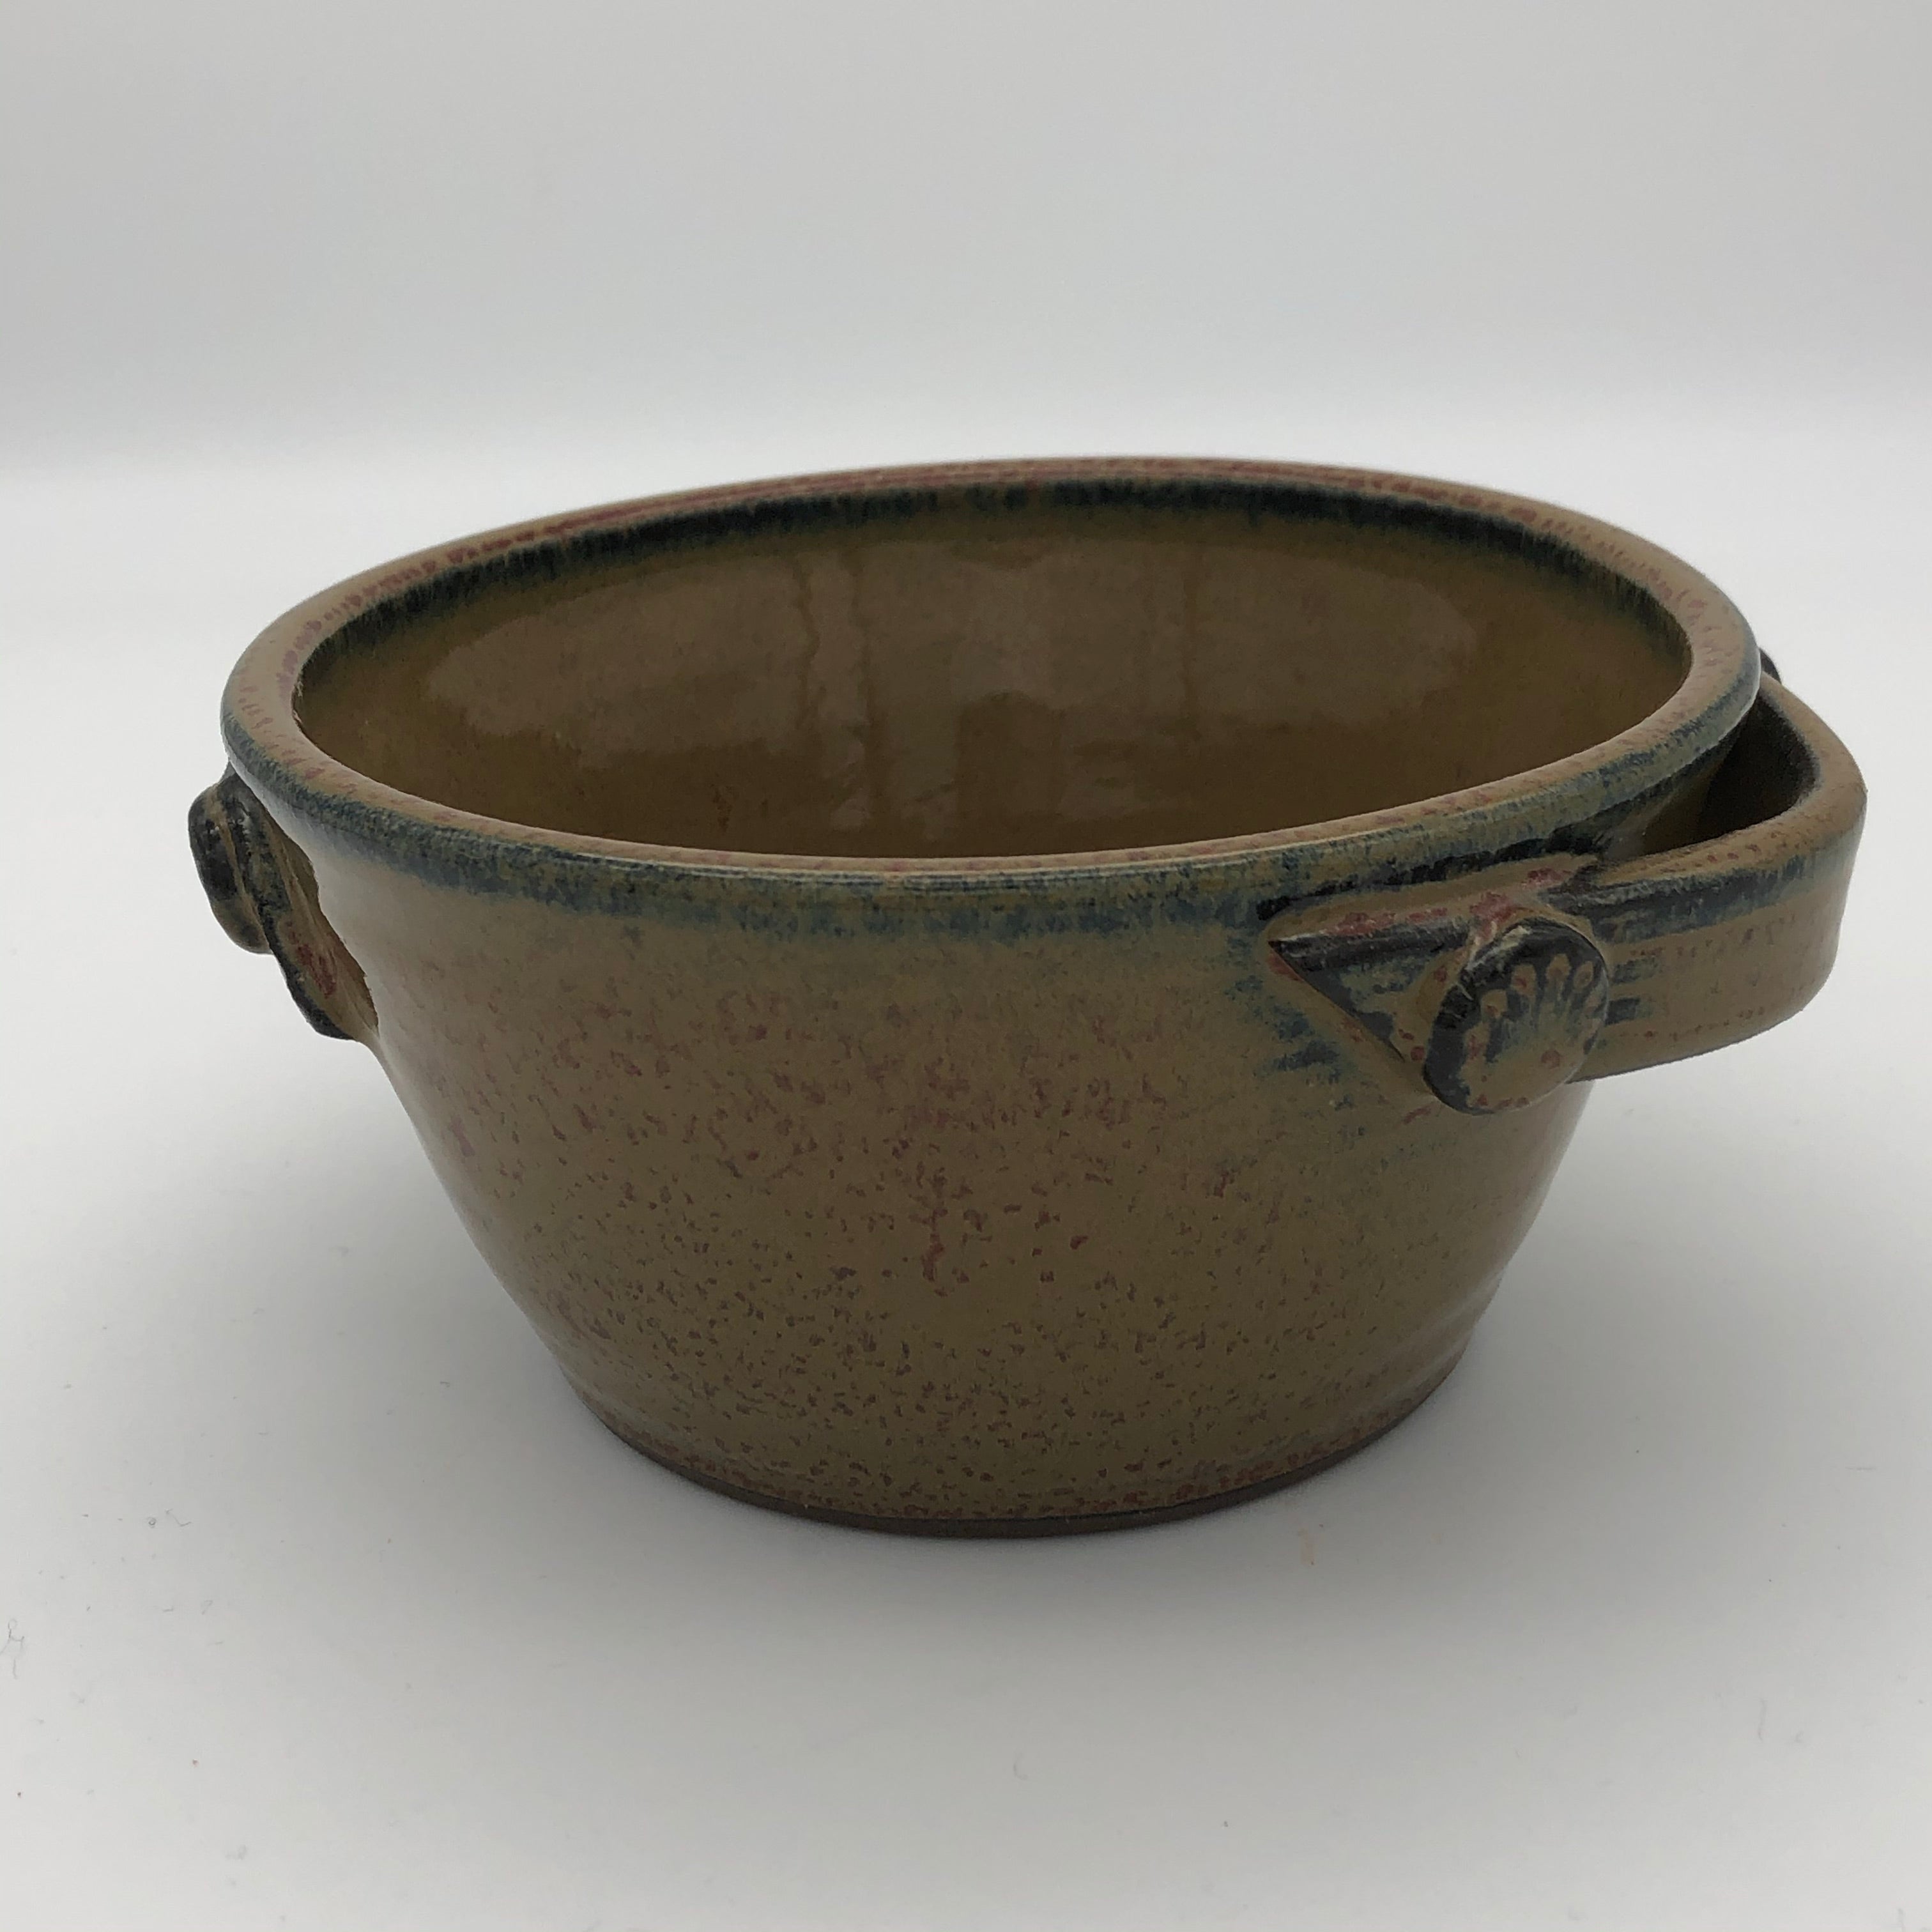 Small bowl with handles in Cola Green